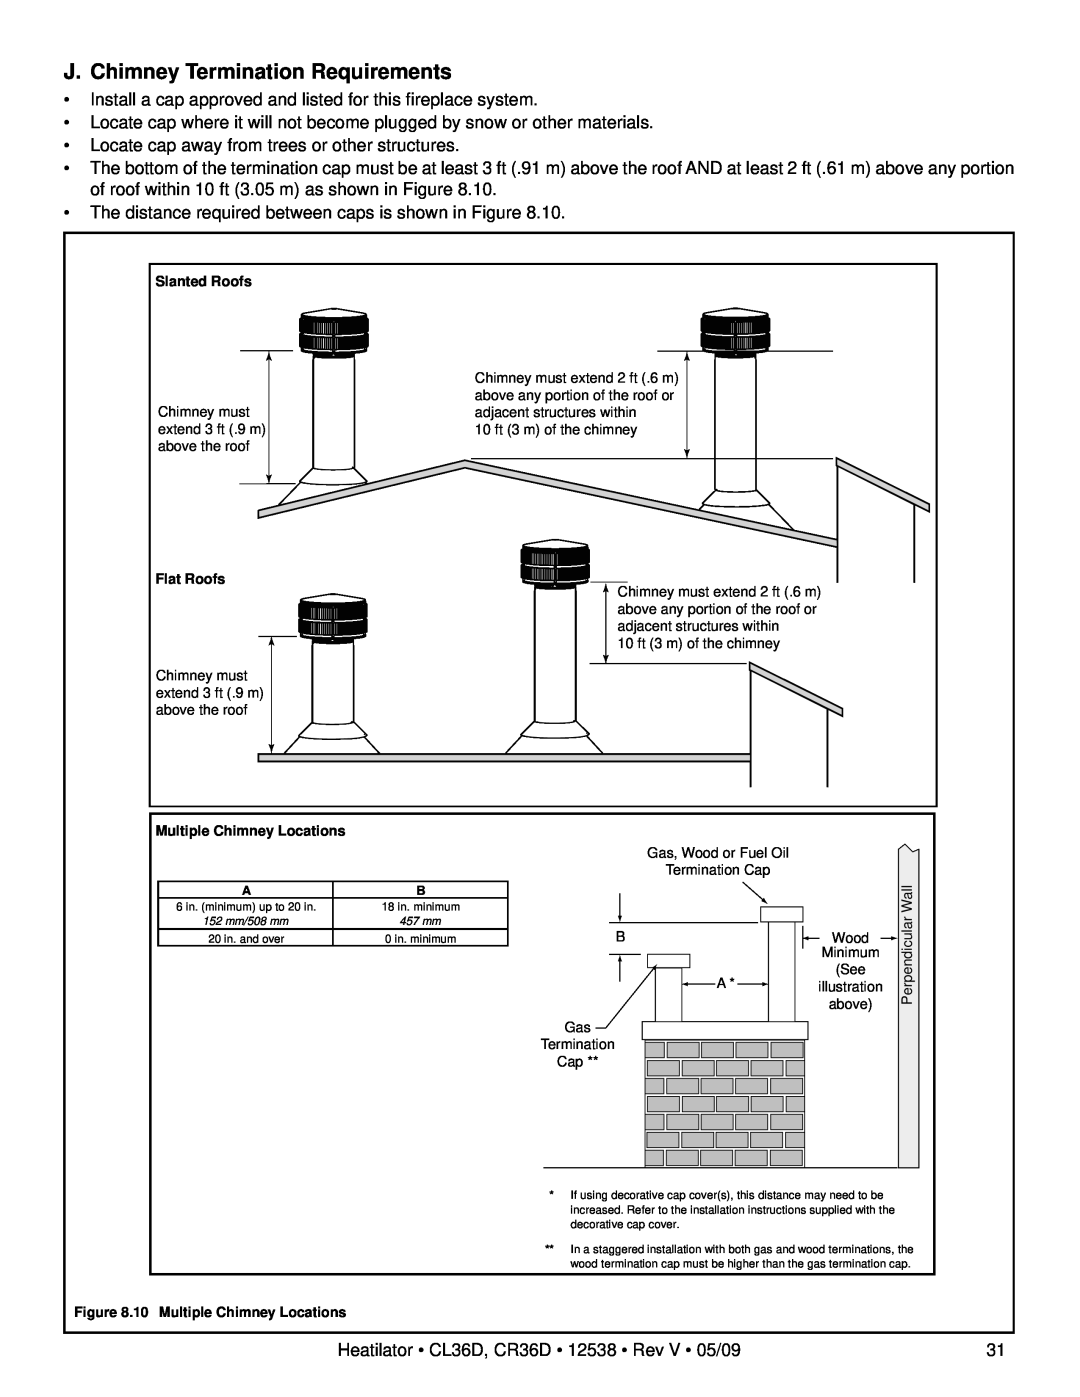 Heatiator CL36D, CR36D owner manual J. Chimney Termination Requirements 